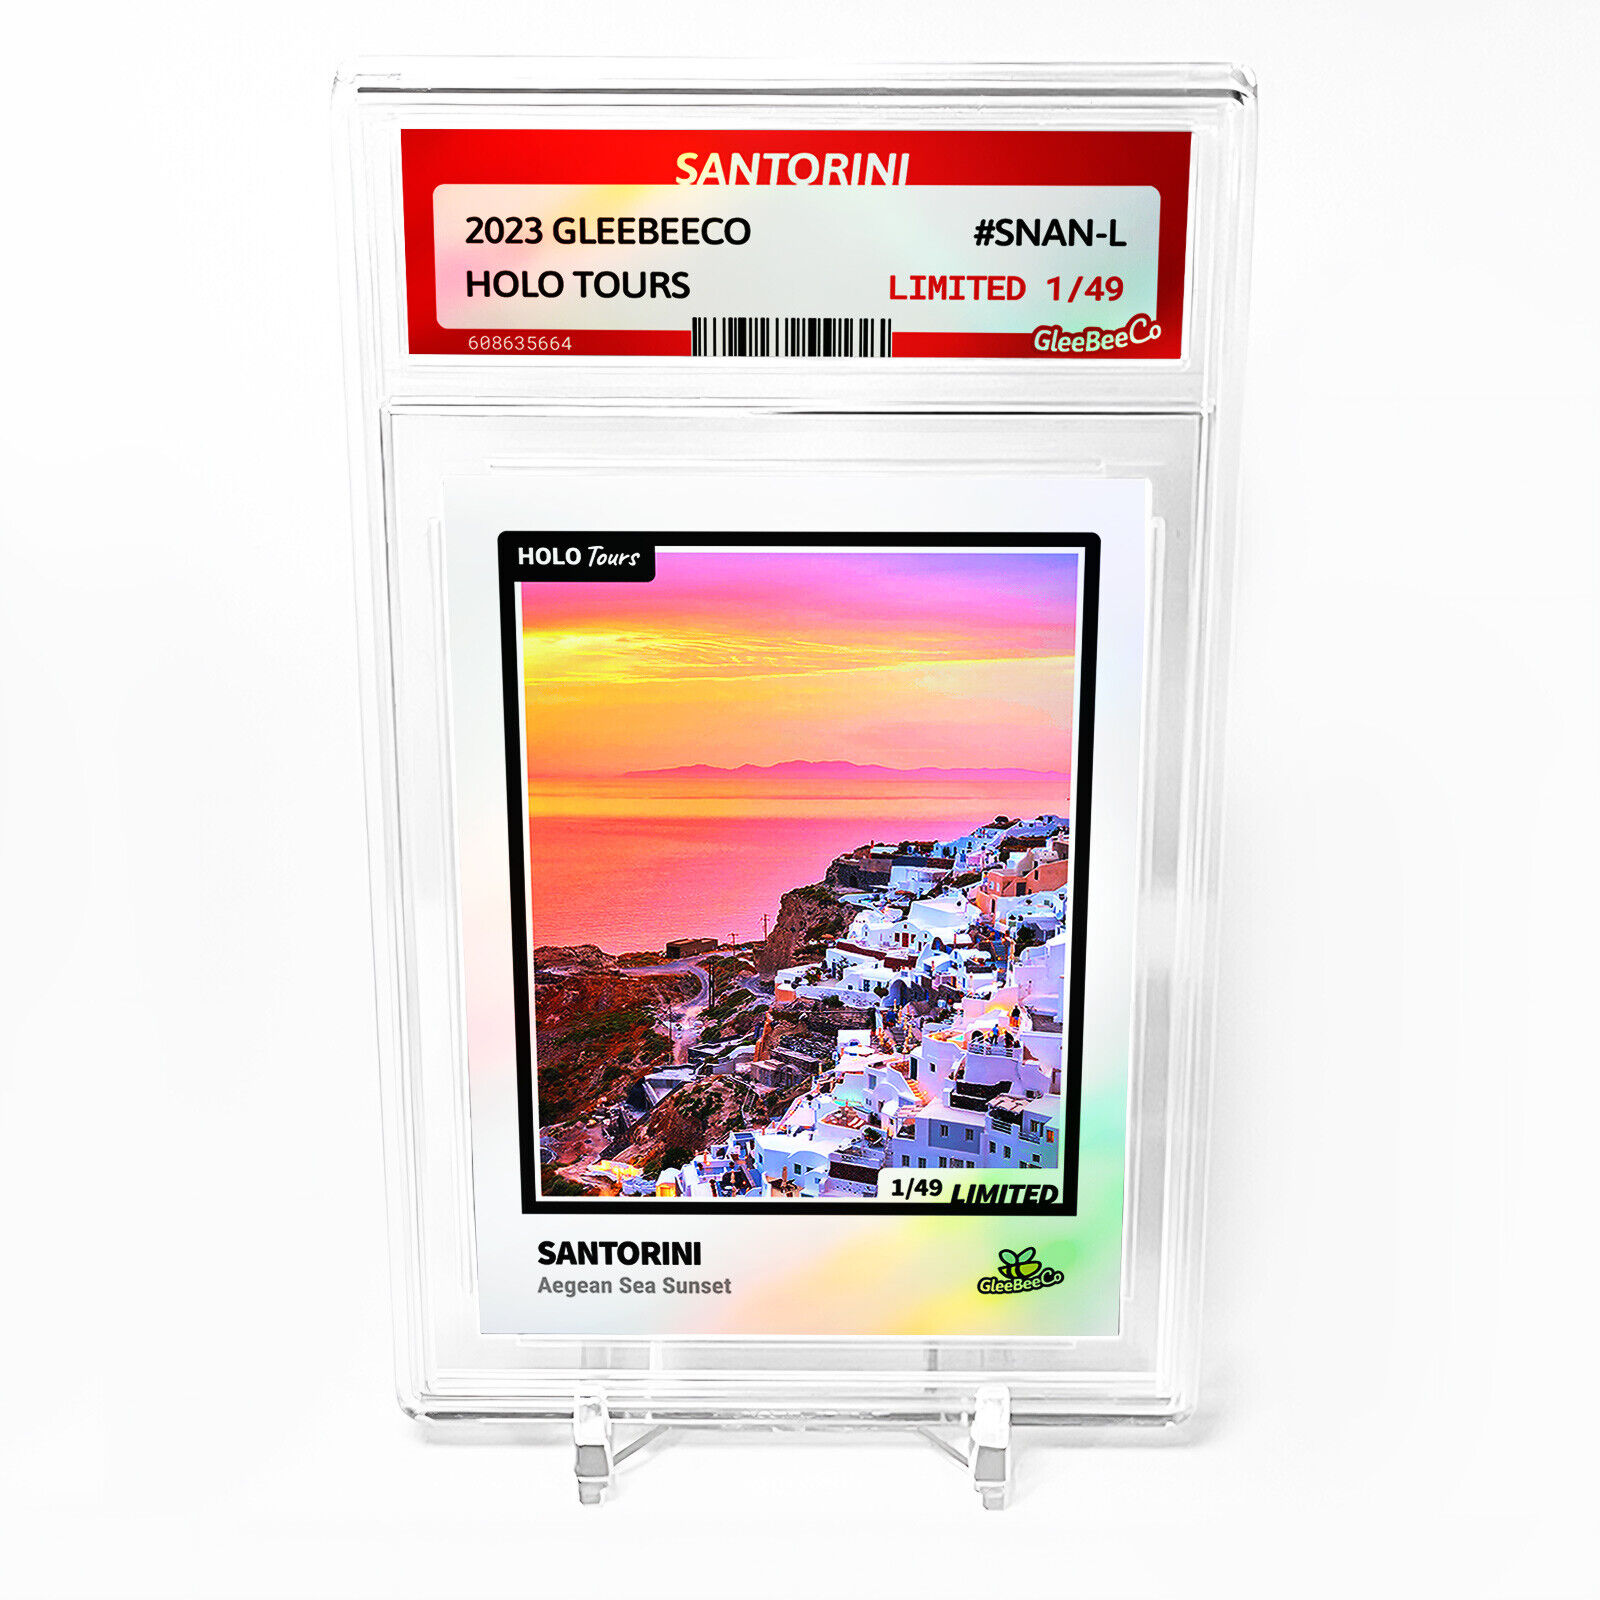 SANTORINI Holographic Photo Card 2023 GleeBeeCo Slabbed #SNAN-L Only /49